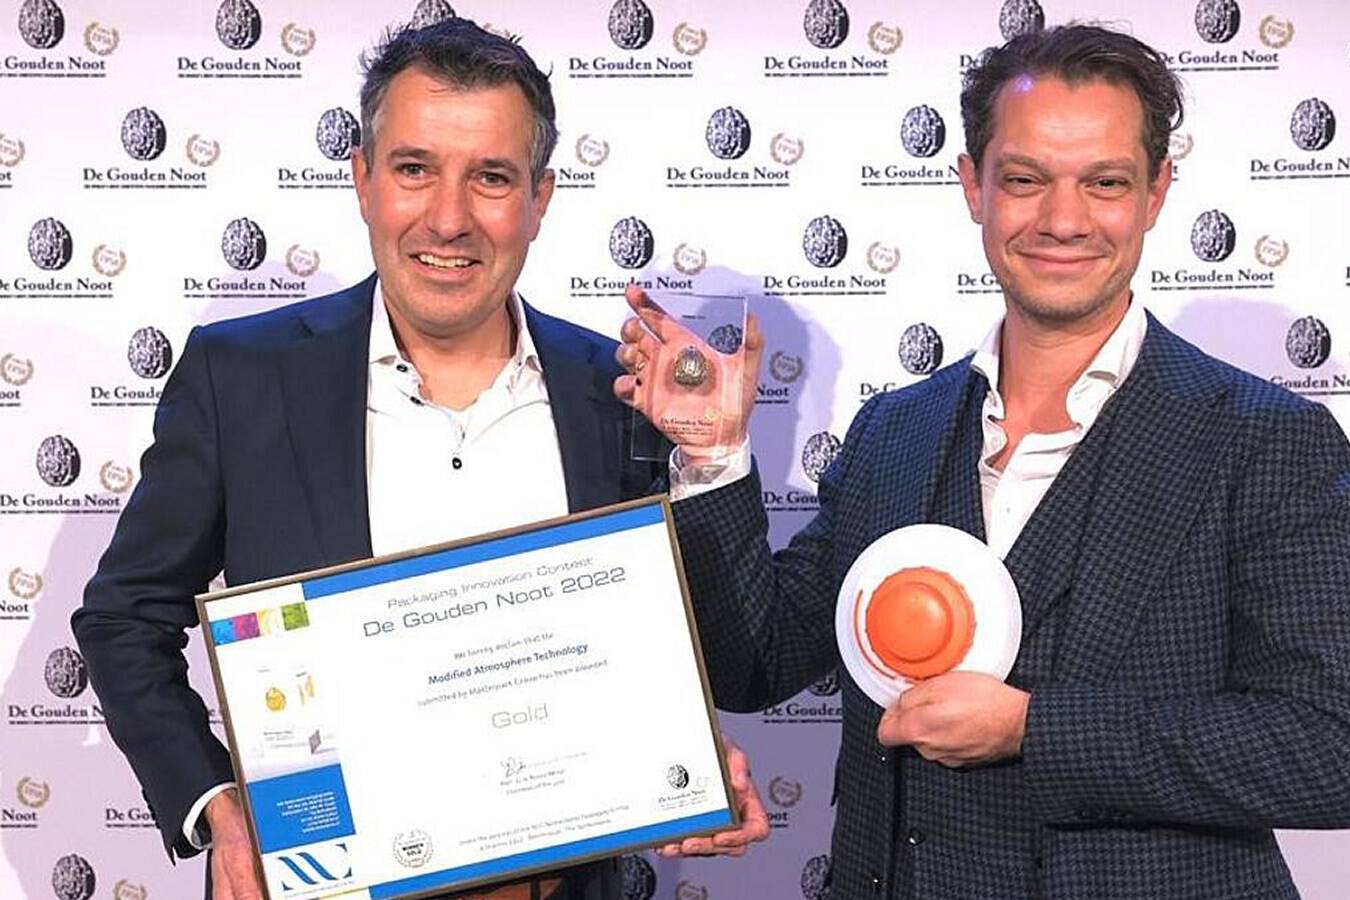 Masterpack Group winner of Packaging Innovation Award Masterpack Group is the winner of ”De Gouden Noot 2022”, the world’s most competitive packaging innovation contest.